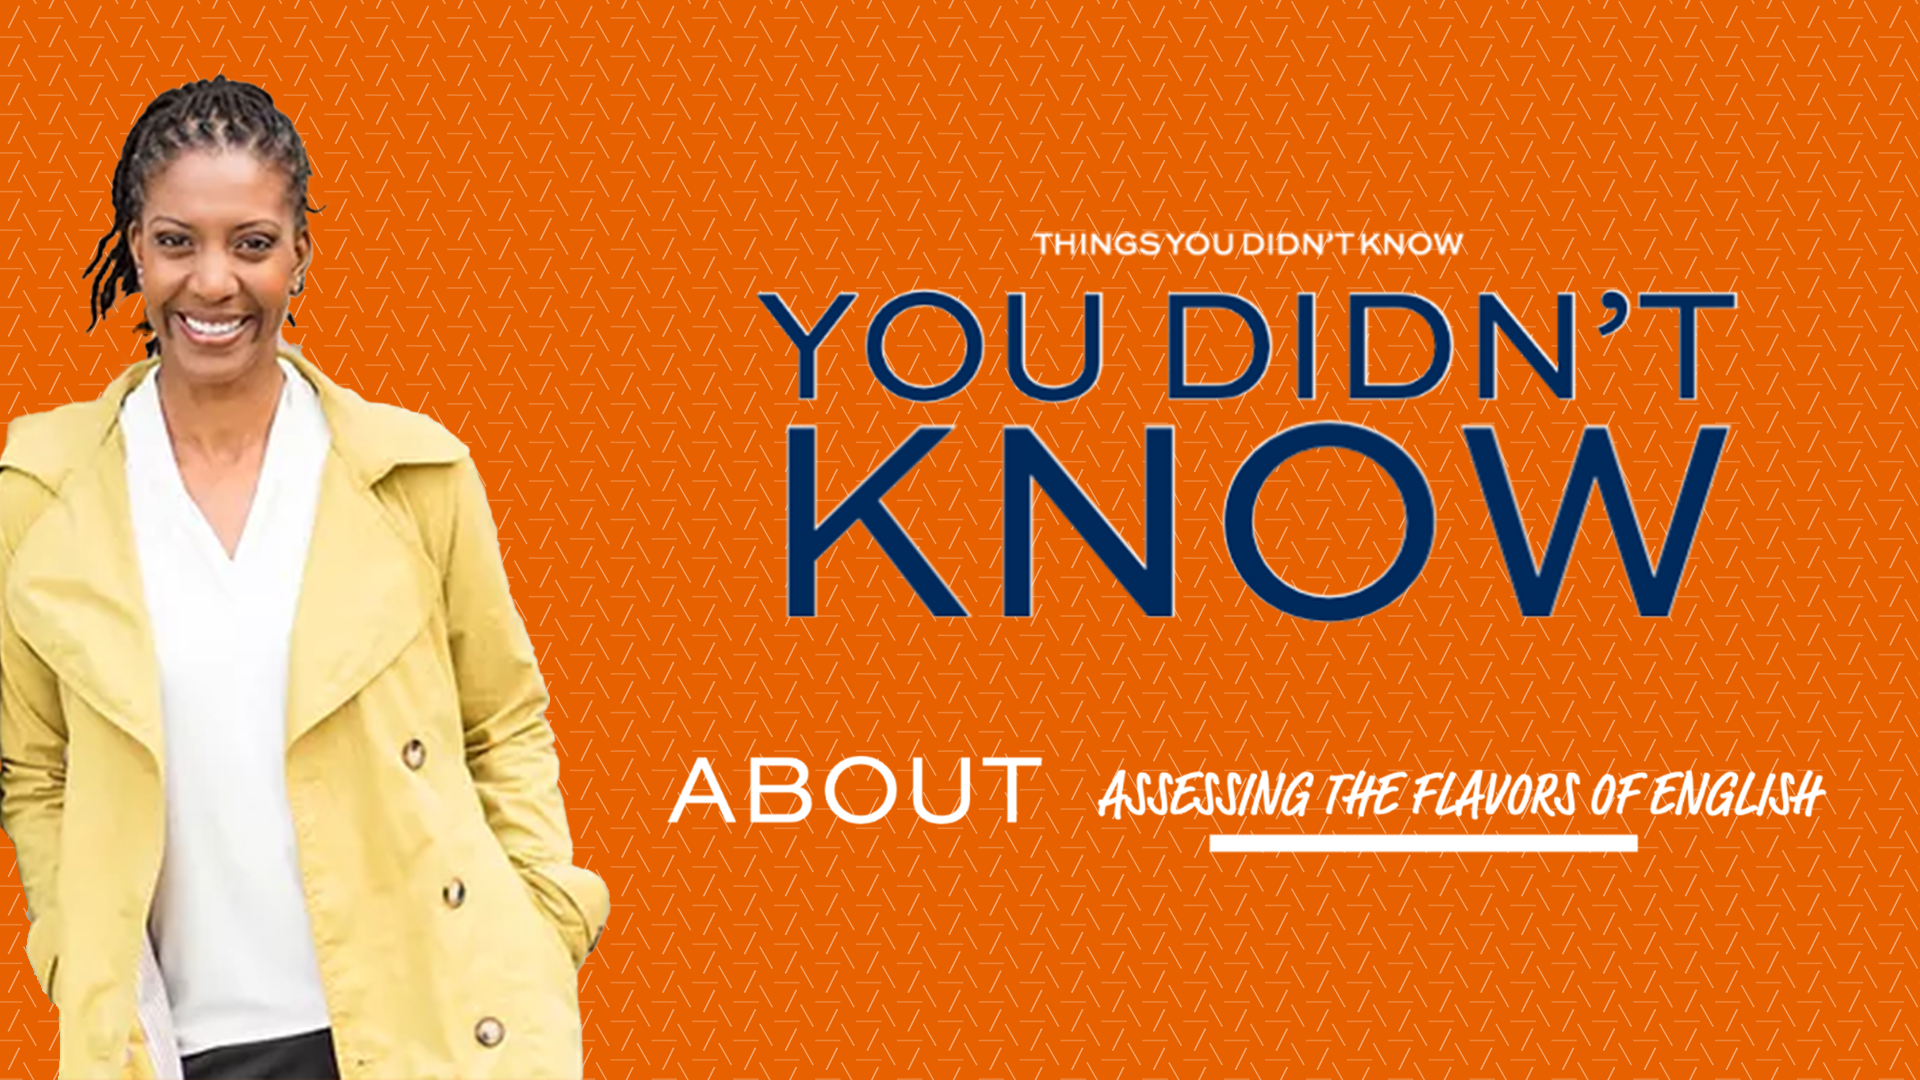 Assistant professor Megan-Brette Hamilton on The Things You Didn't Know You Didn't Know graphic